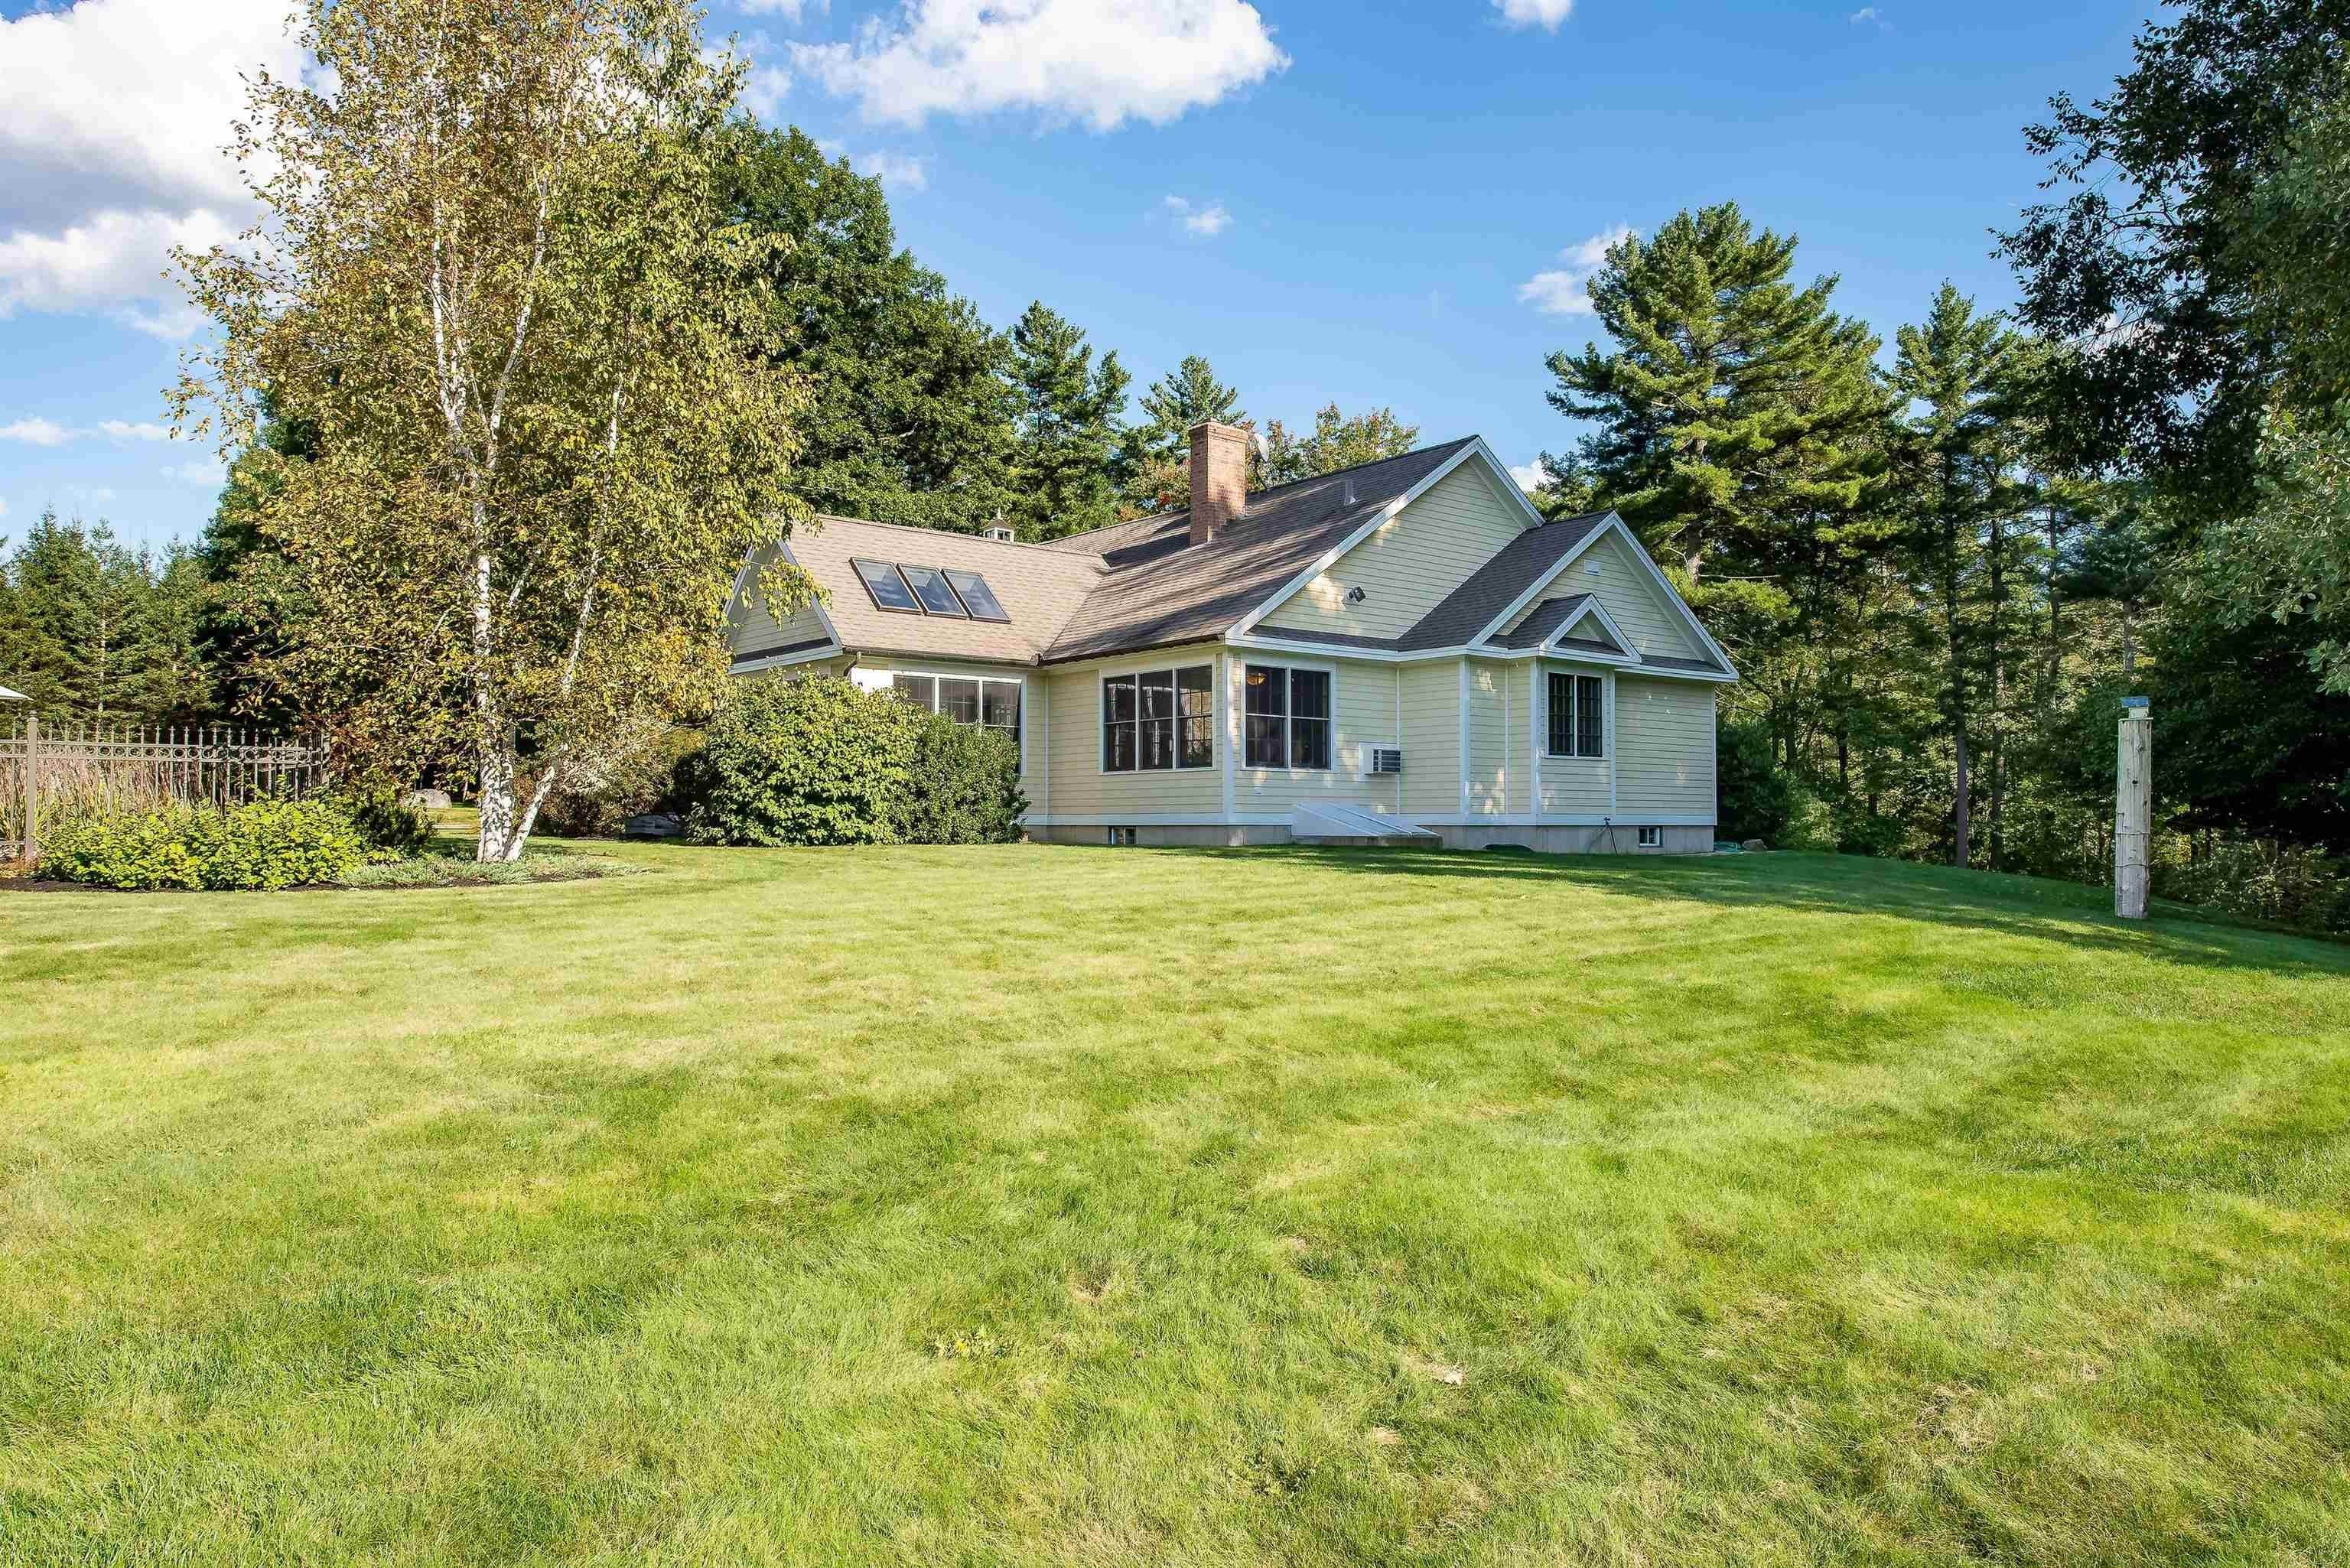 8. Single Family for Sale at Rollinsford, NH 03869